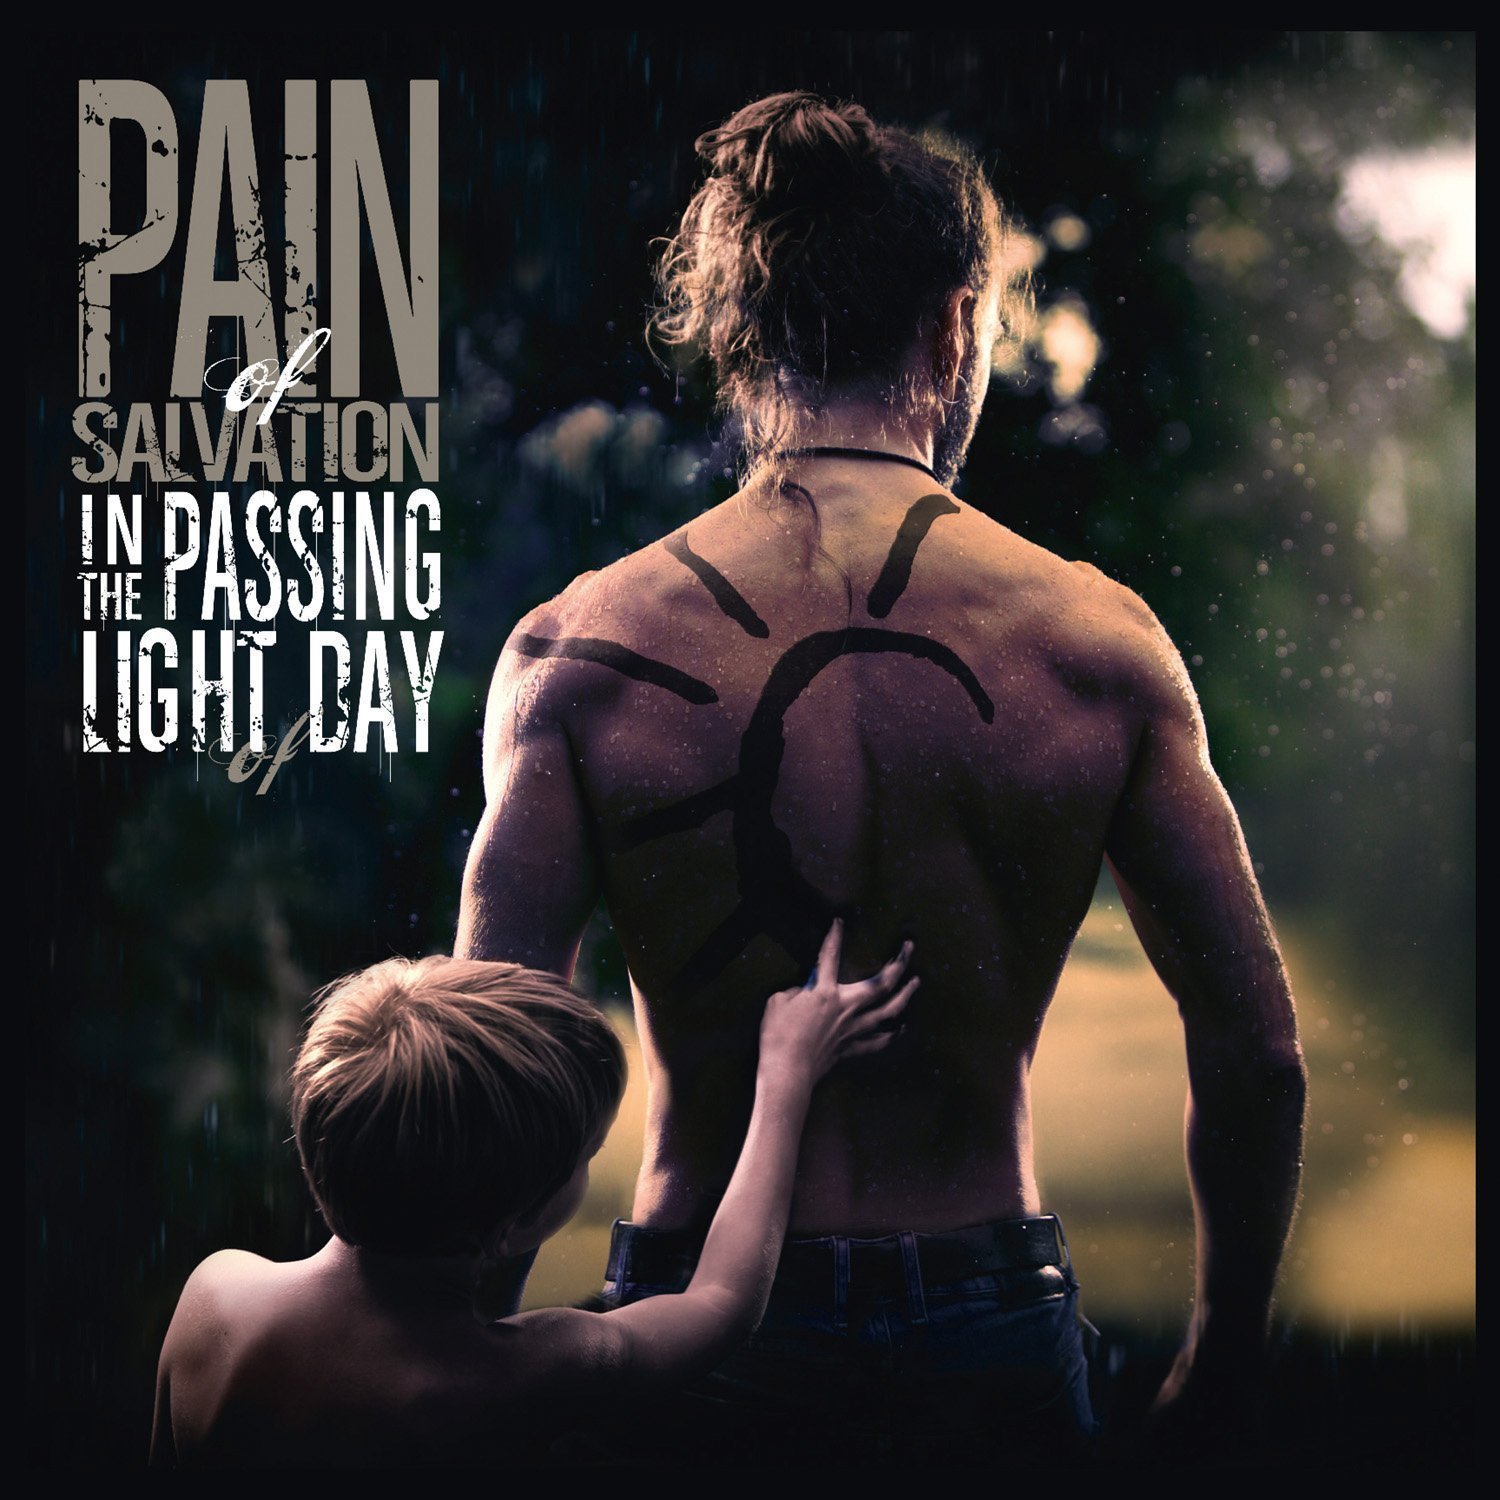 Vinyl Record Pain Of Salvation In the Passing Light of Day (3 LP)